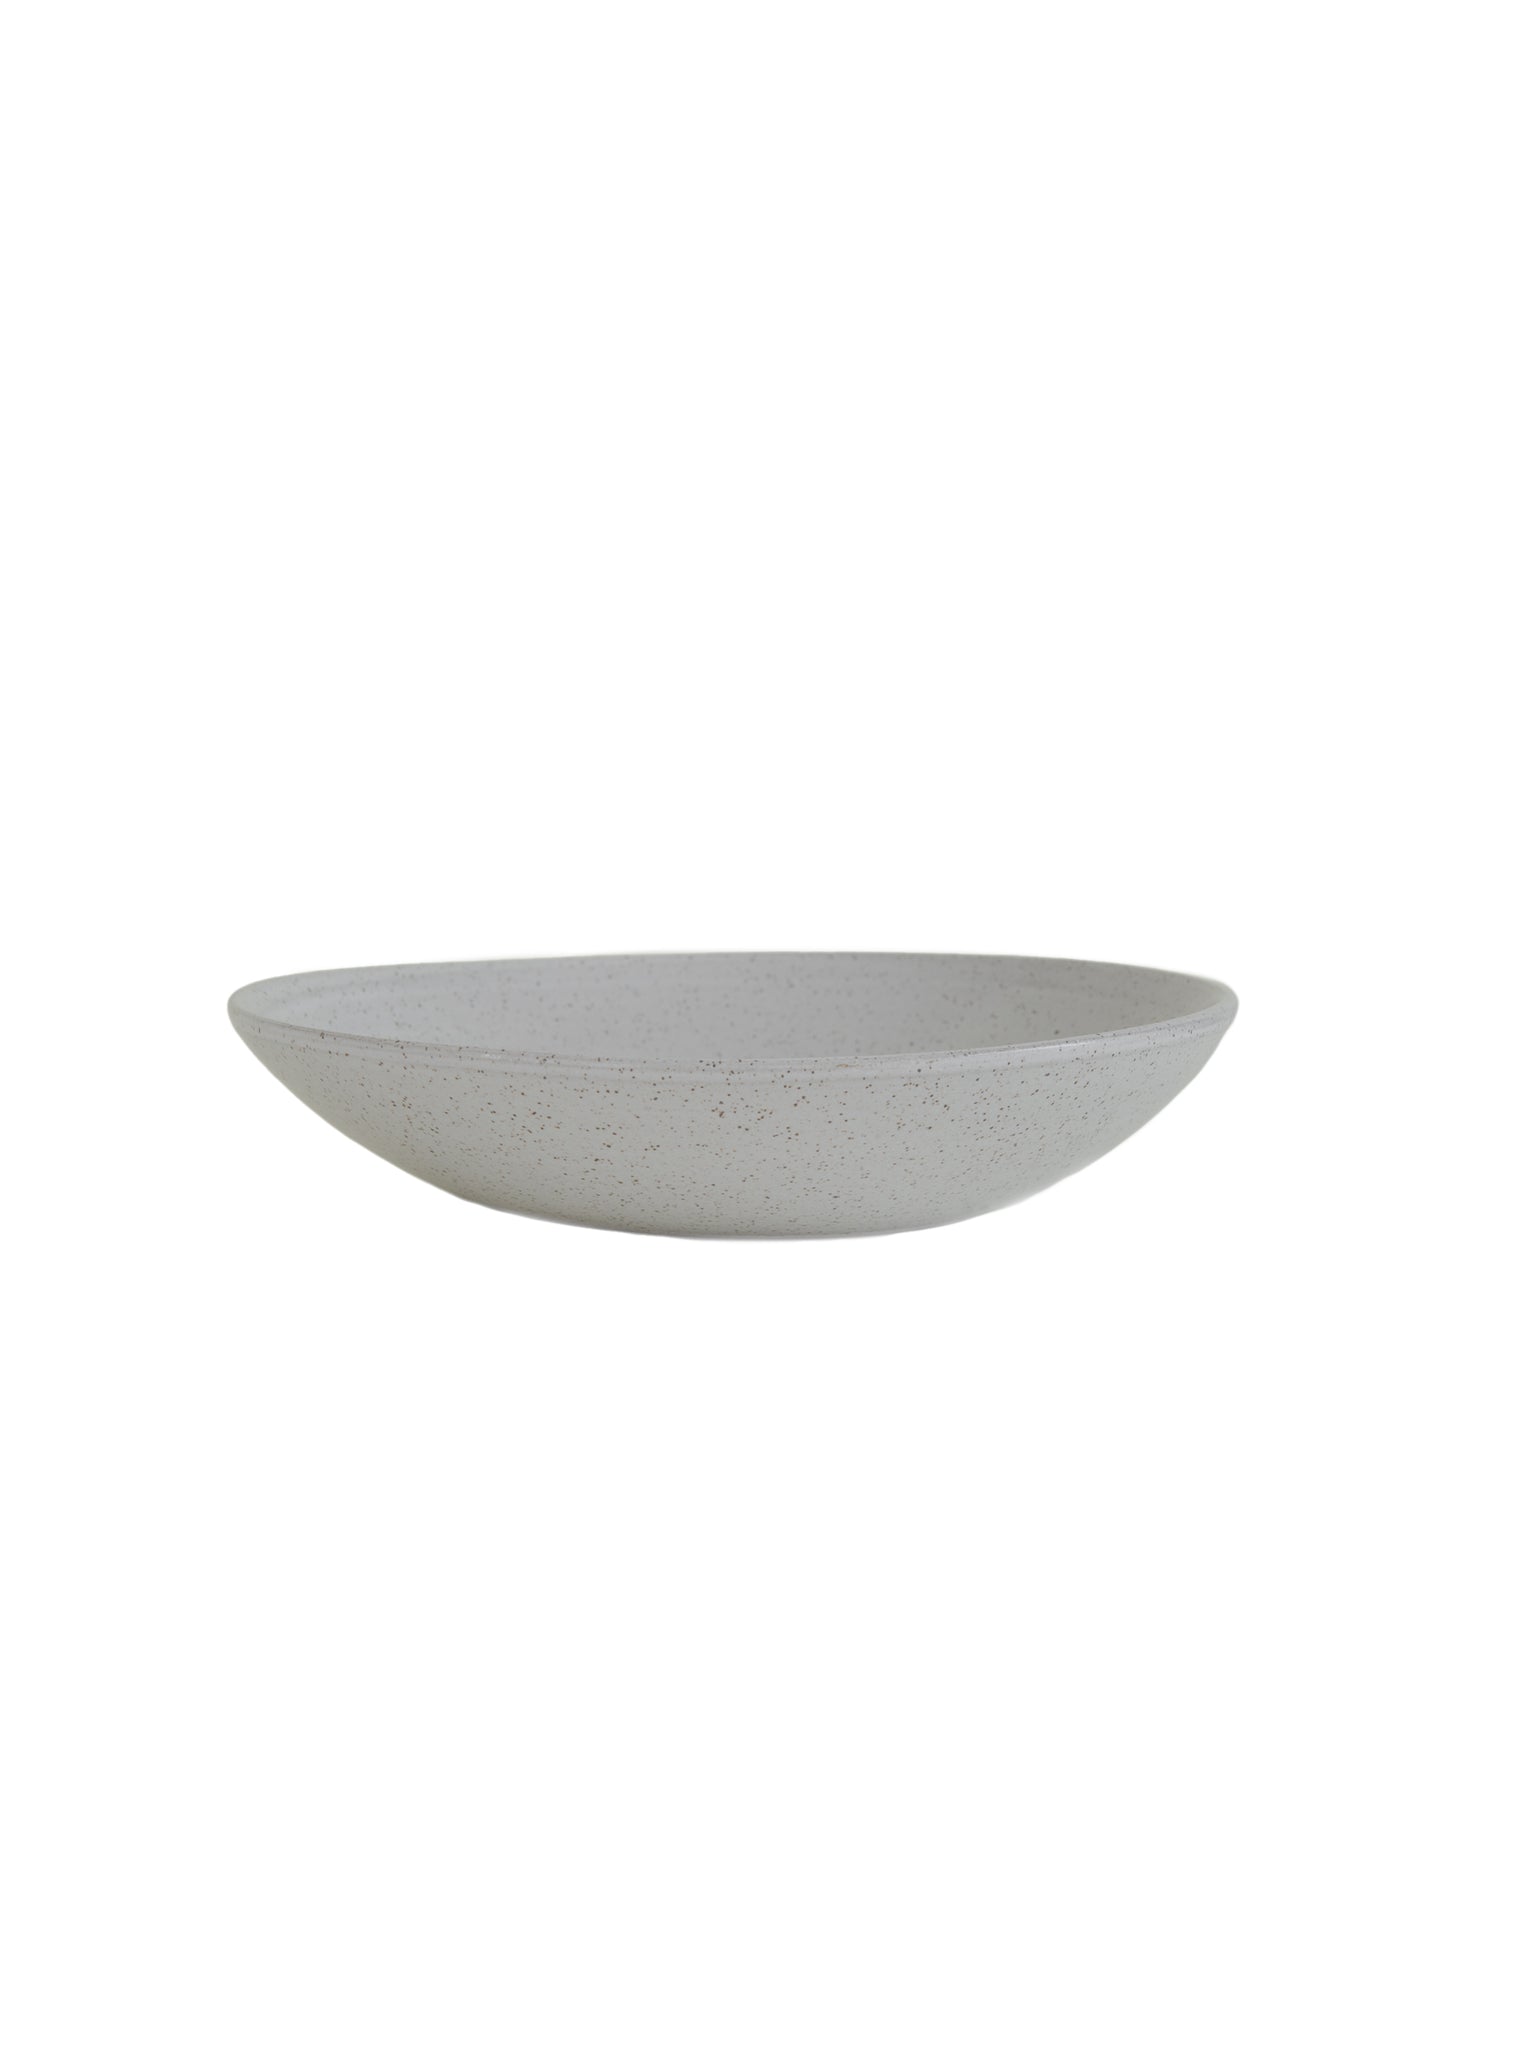 McQueen Pottery Speckled Entree Bowl Weston Table